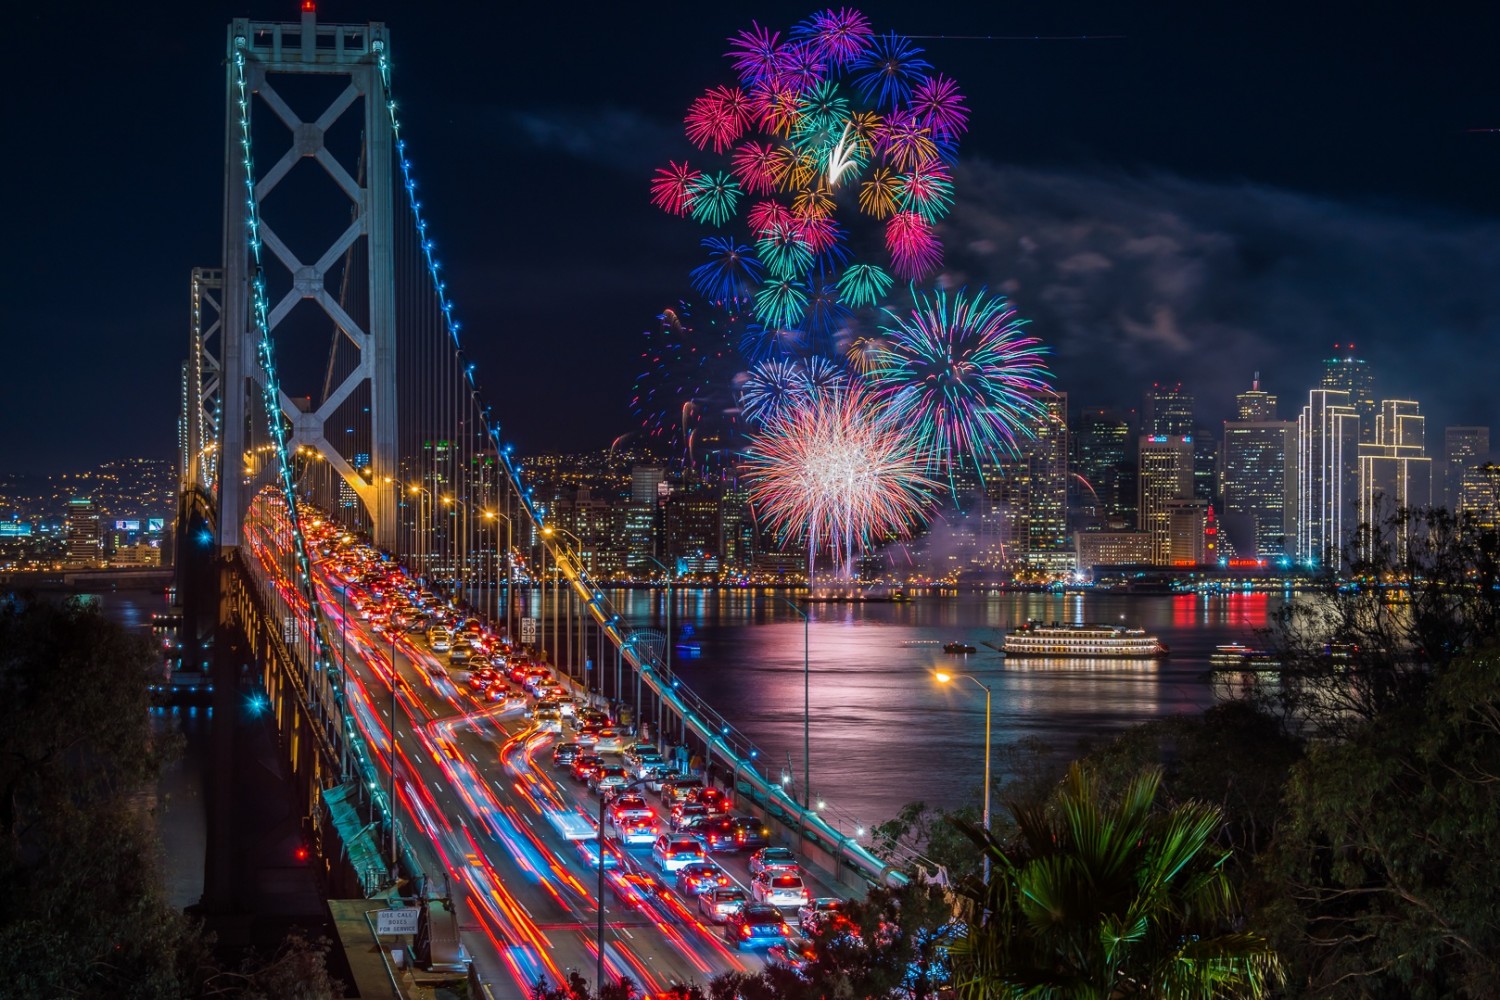 10 Inspirational New Year's Resolutions from the 500px Community